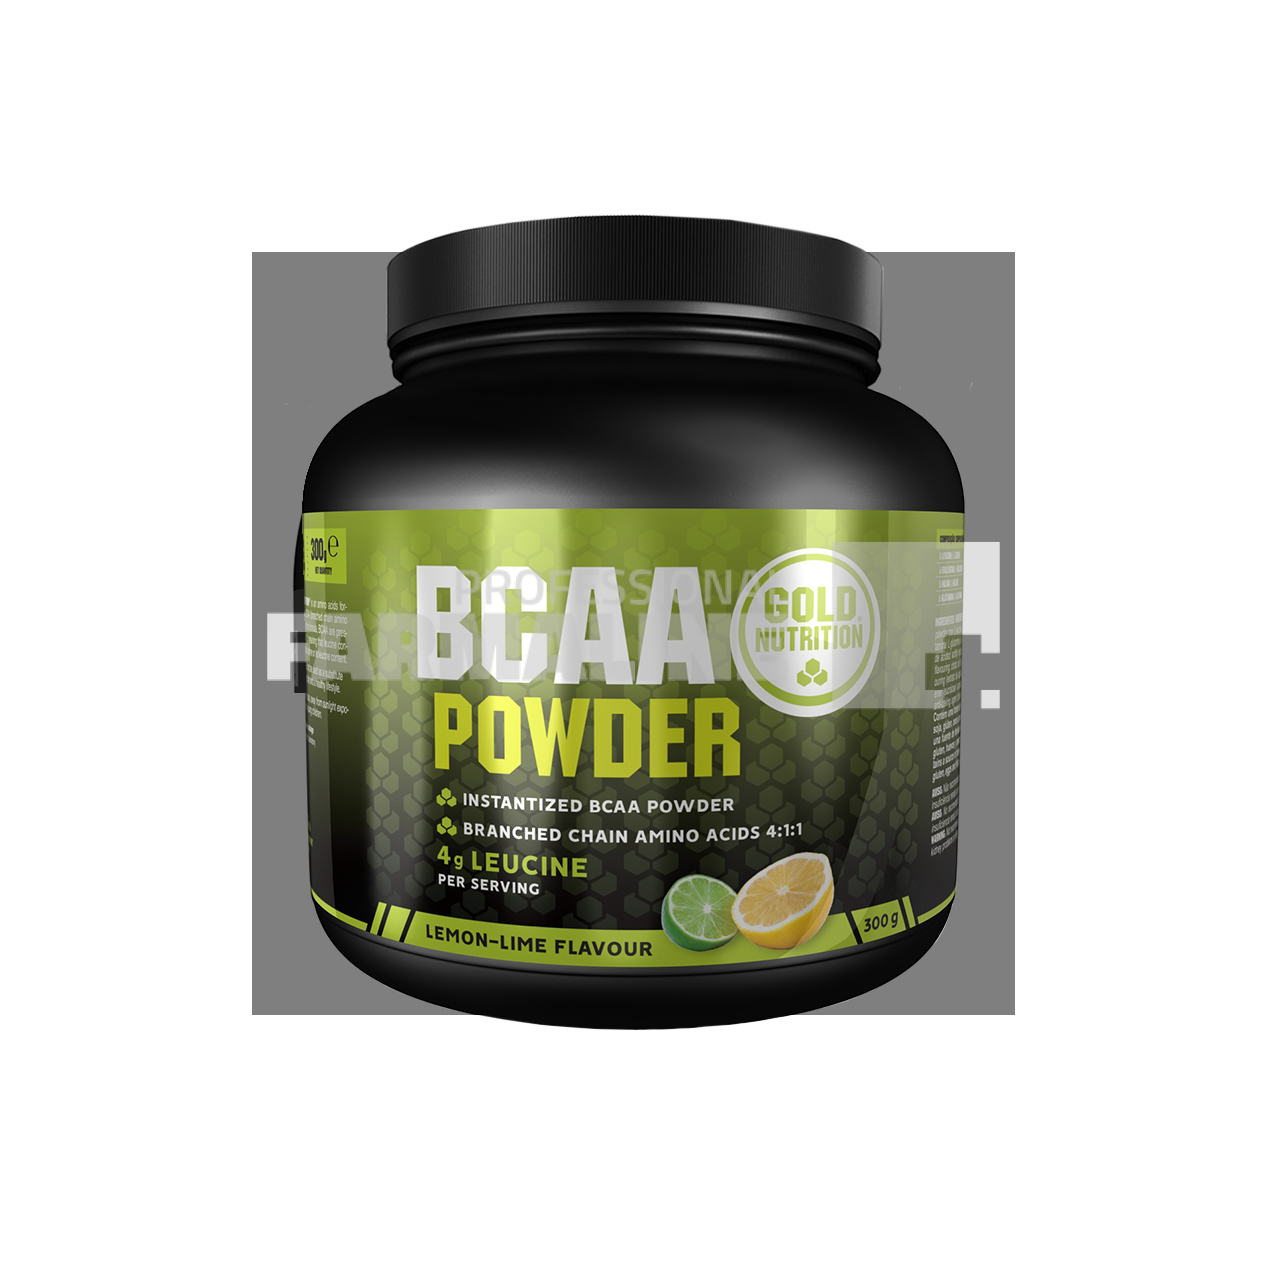 Gold Nutrition BCAA pudra 300 g